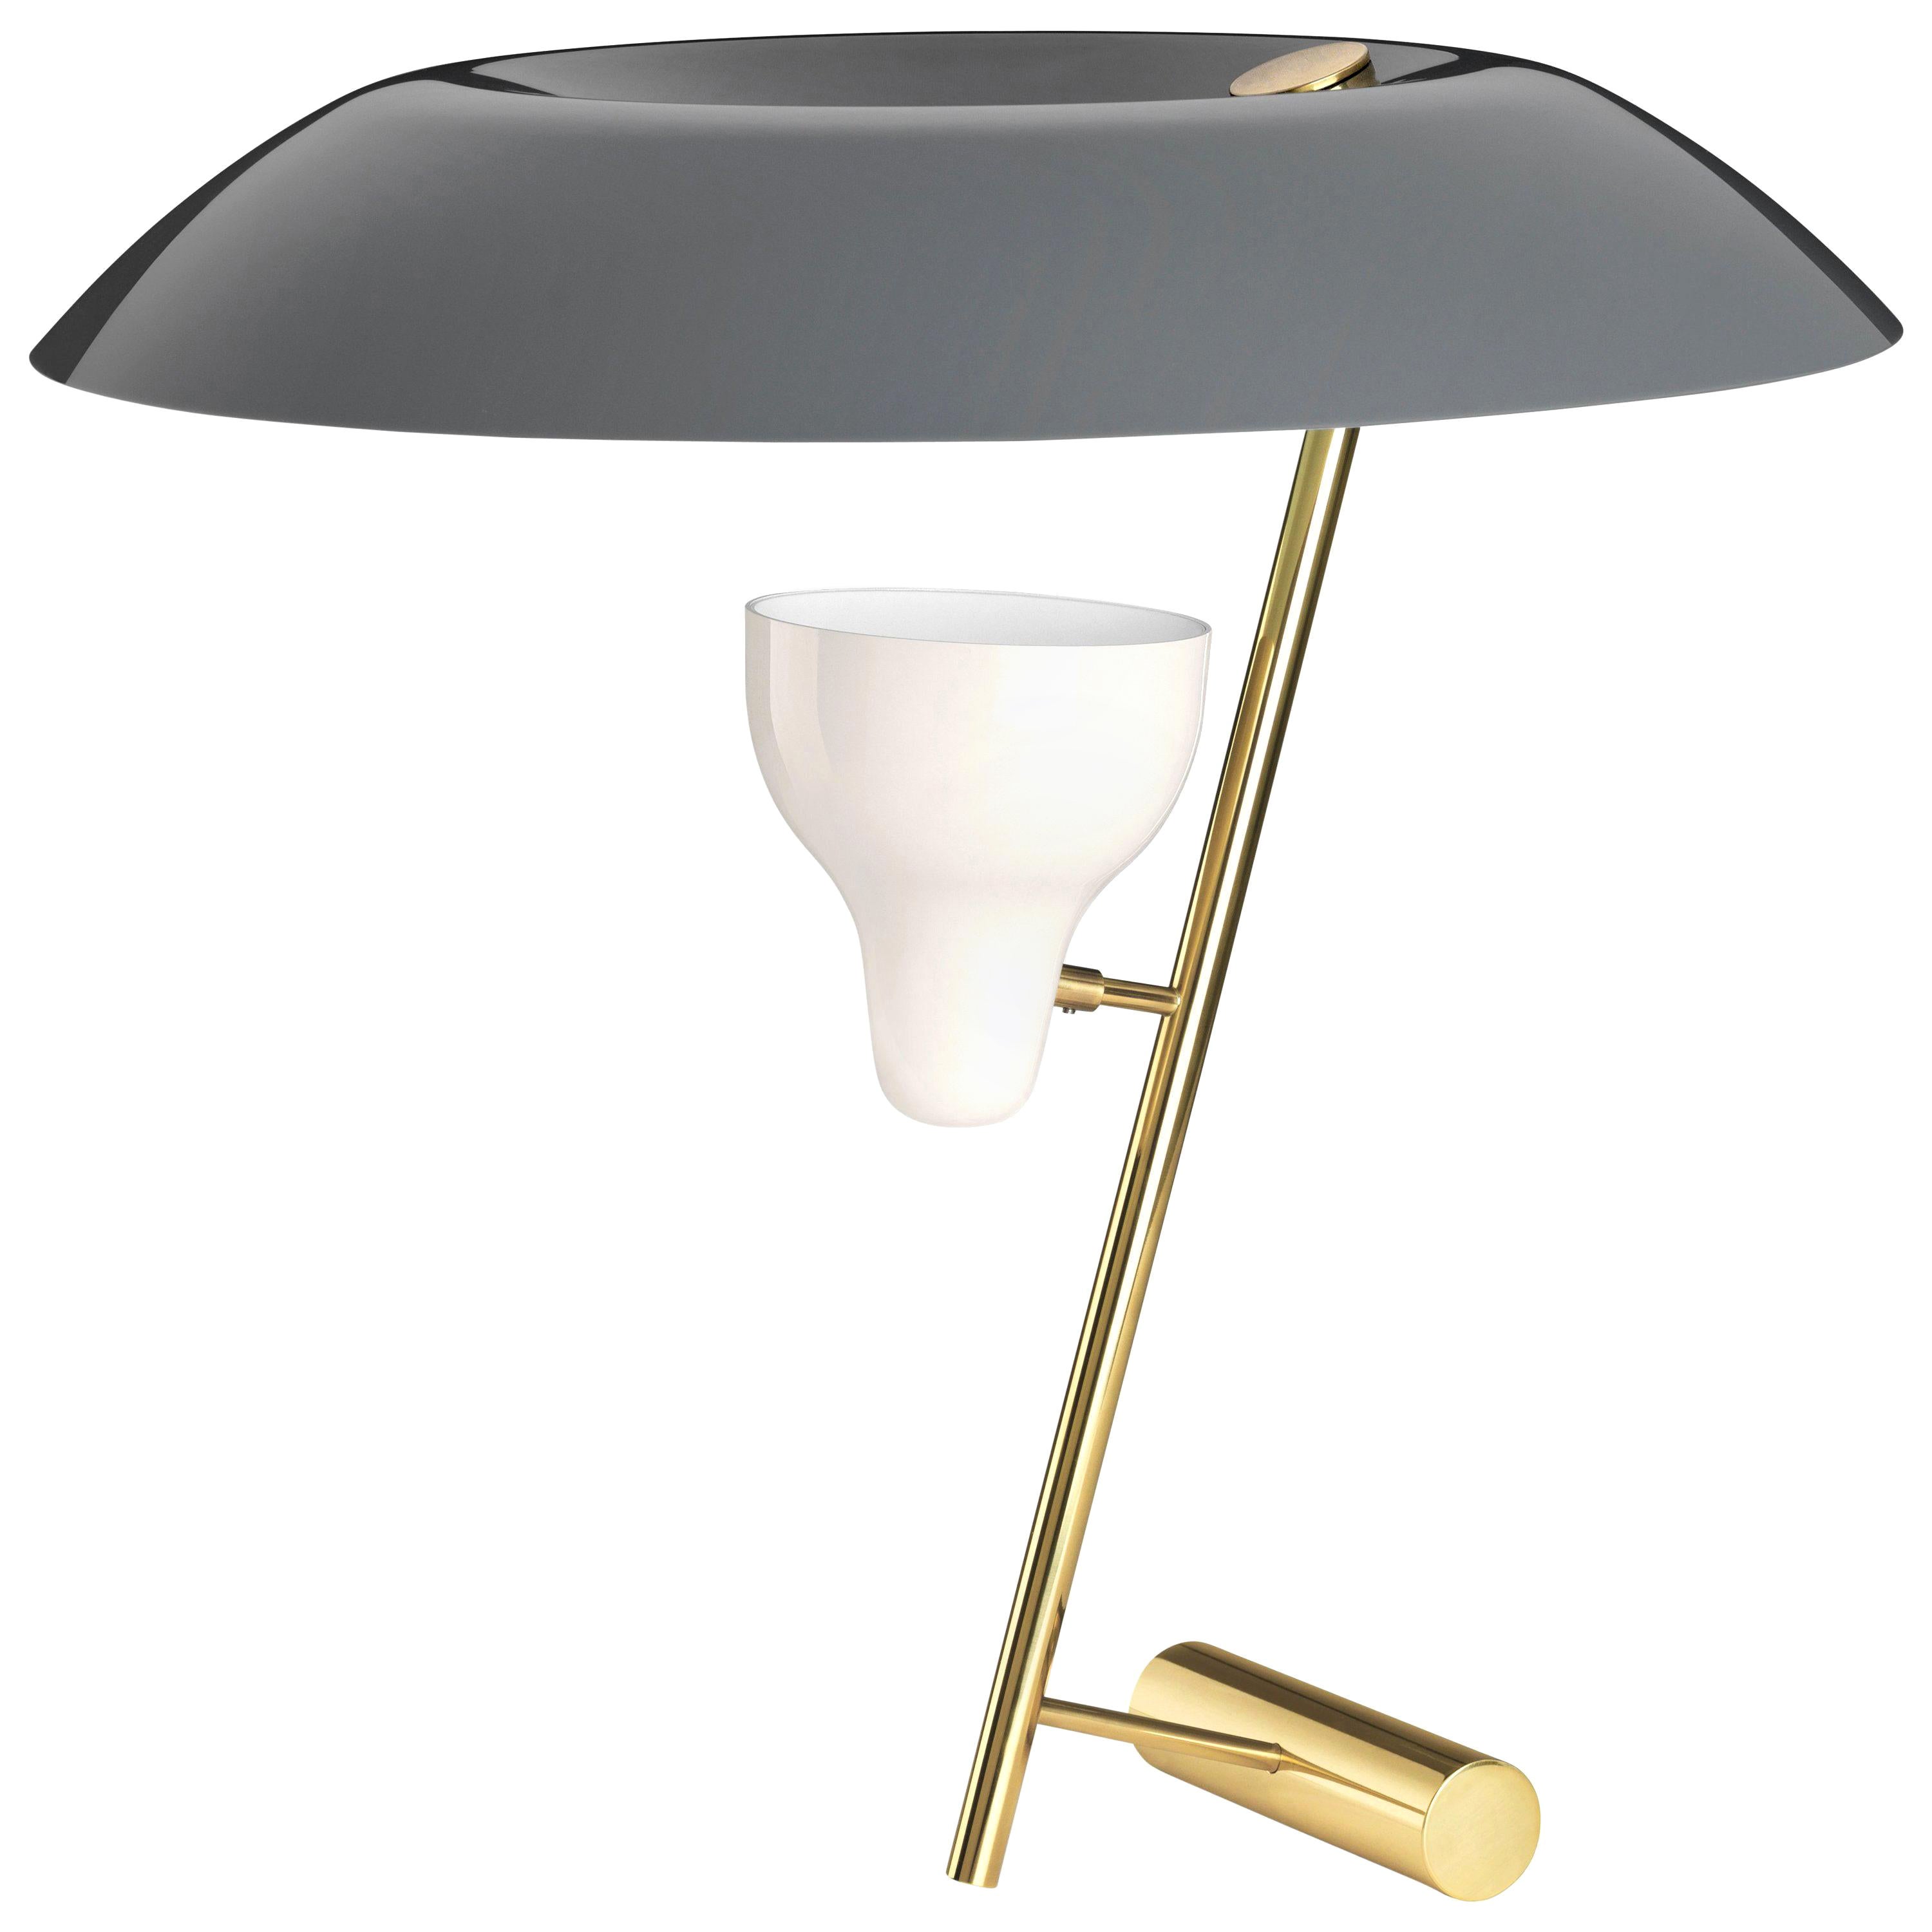 Gino Sarfatti Model #548 Table Lamp in Gray and Polished Brass For Sale